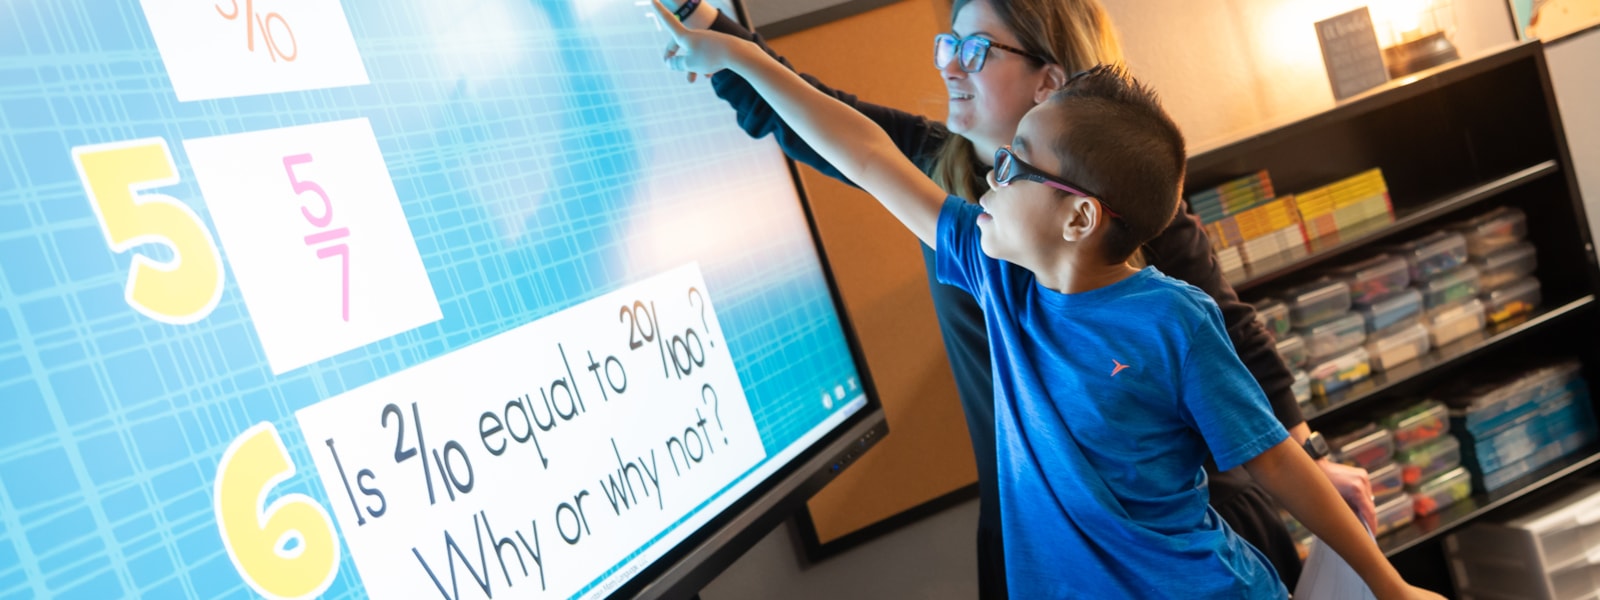 A teacher helping a student with math on a smart board.